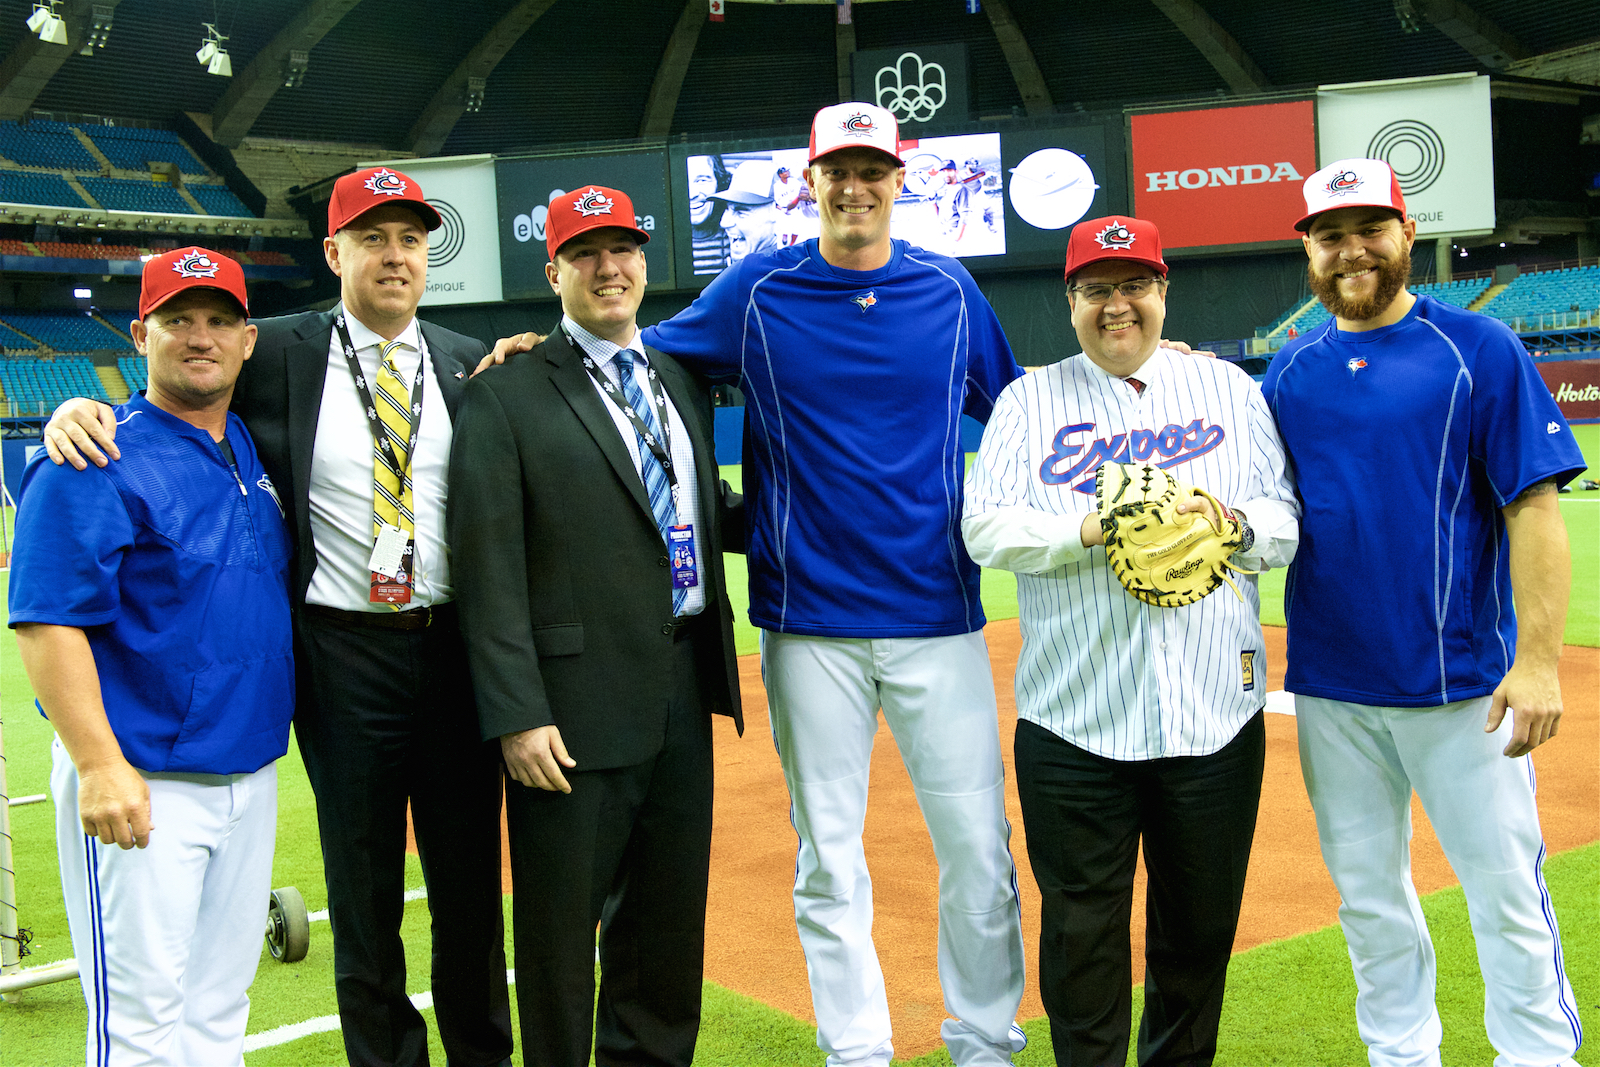 Baseball Canada launches Summer's Perfect Game